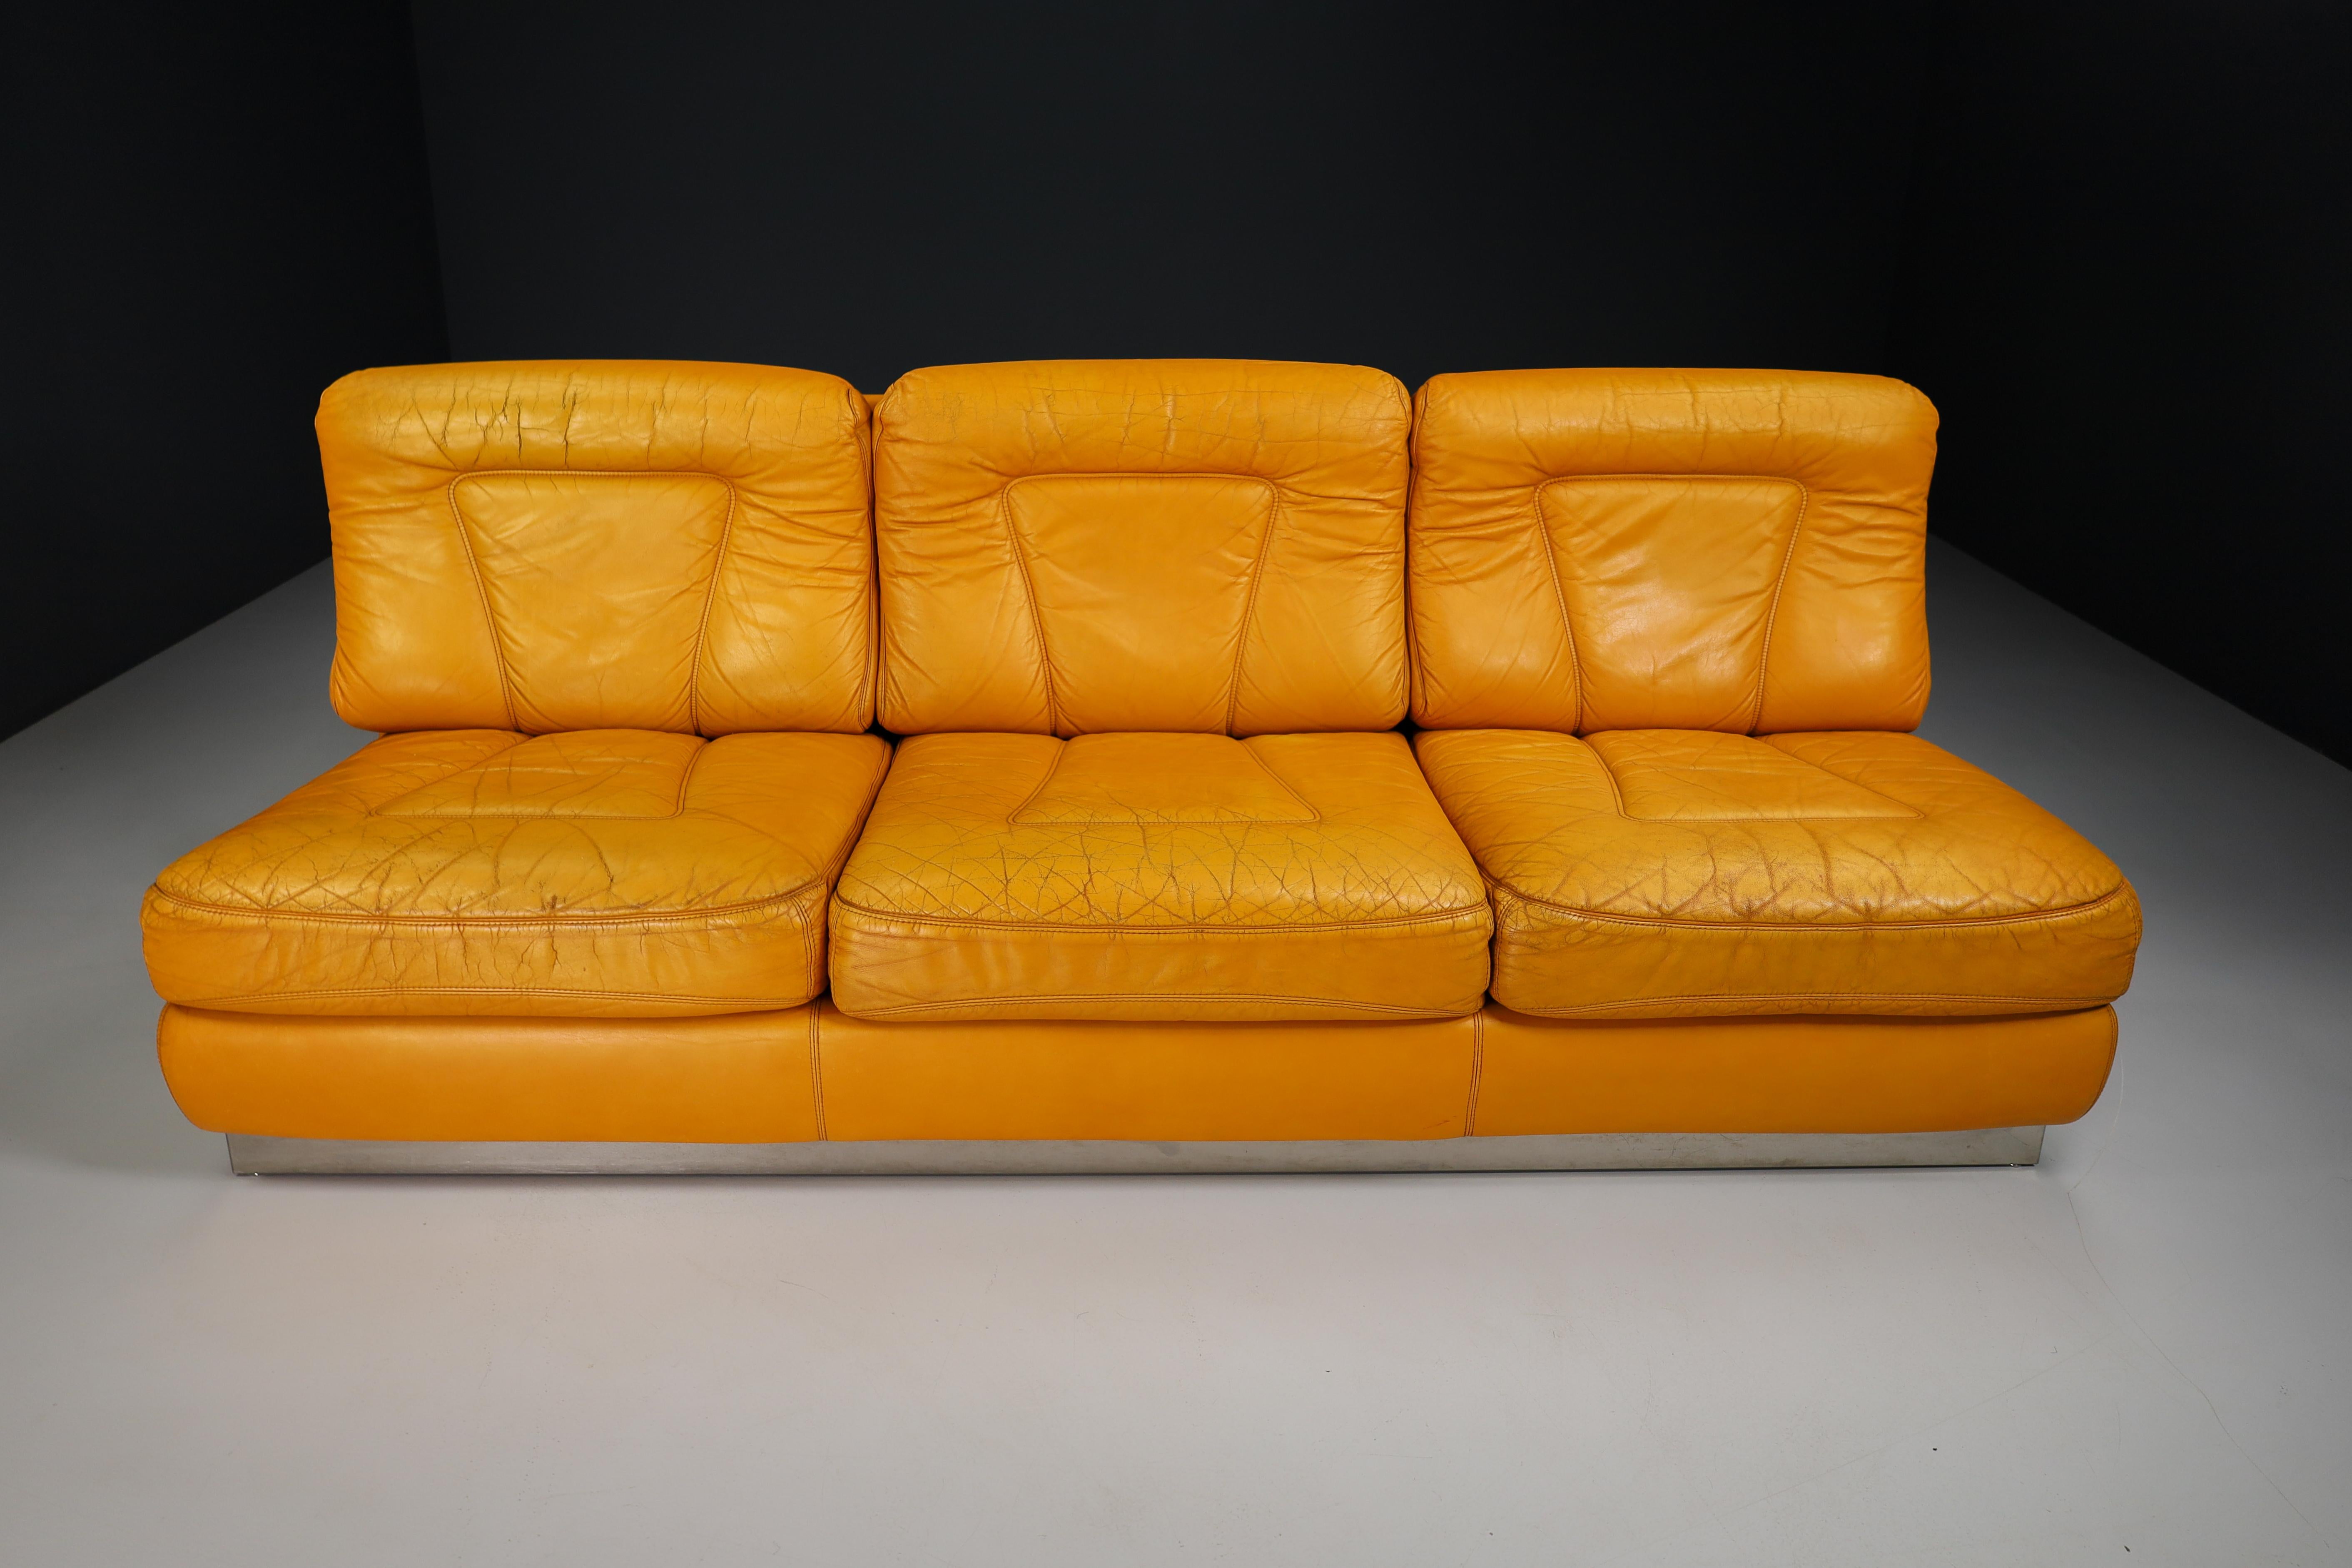 Jacques Charpentier leather and stainless steel lounge sofa, France 1970s

Very comfortable sofa by Jacques Charpentier, France, 1970s. The attractive sleek design of a carved-out cubic shape on a polished stainless steel base provides a very